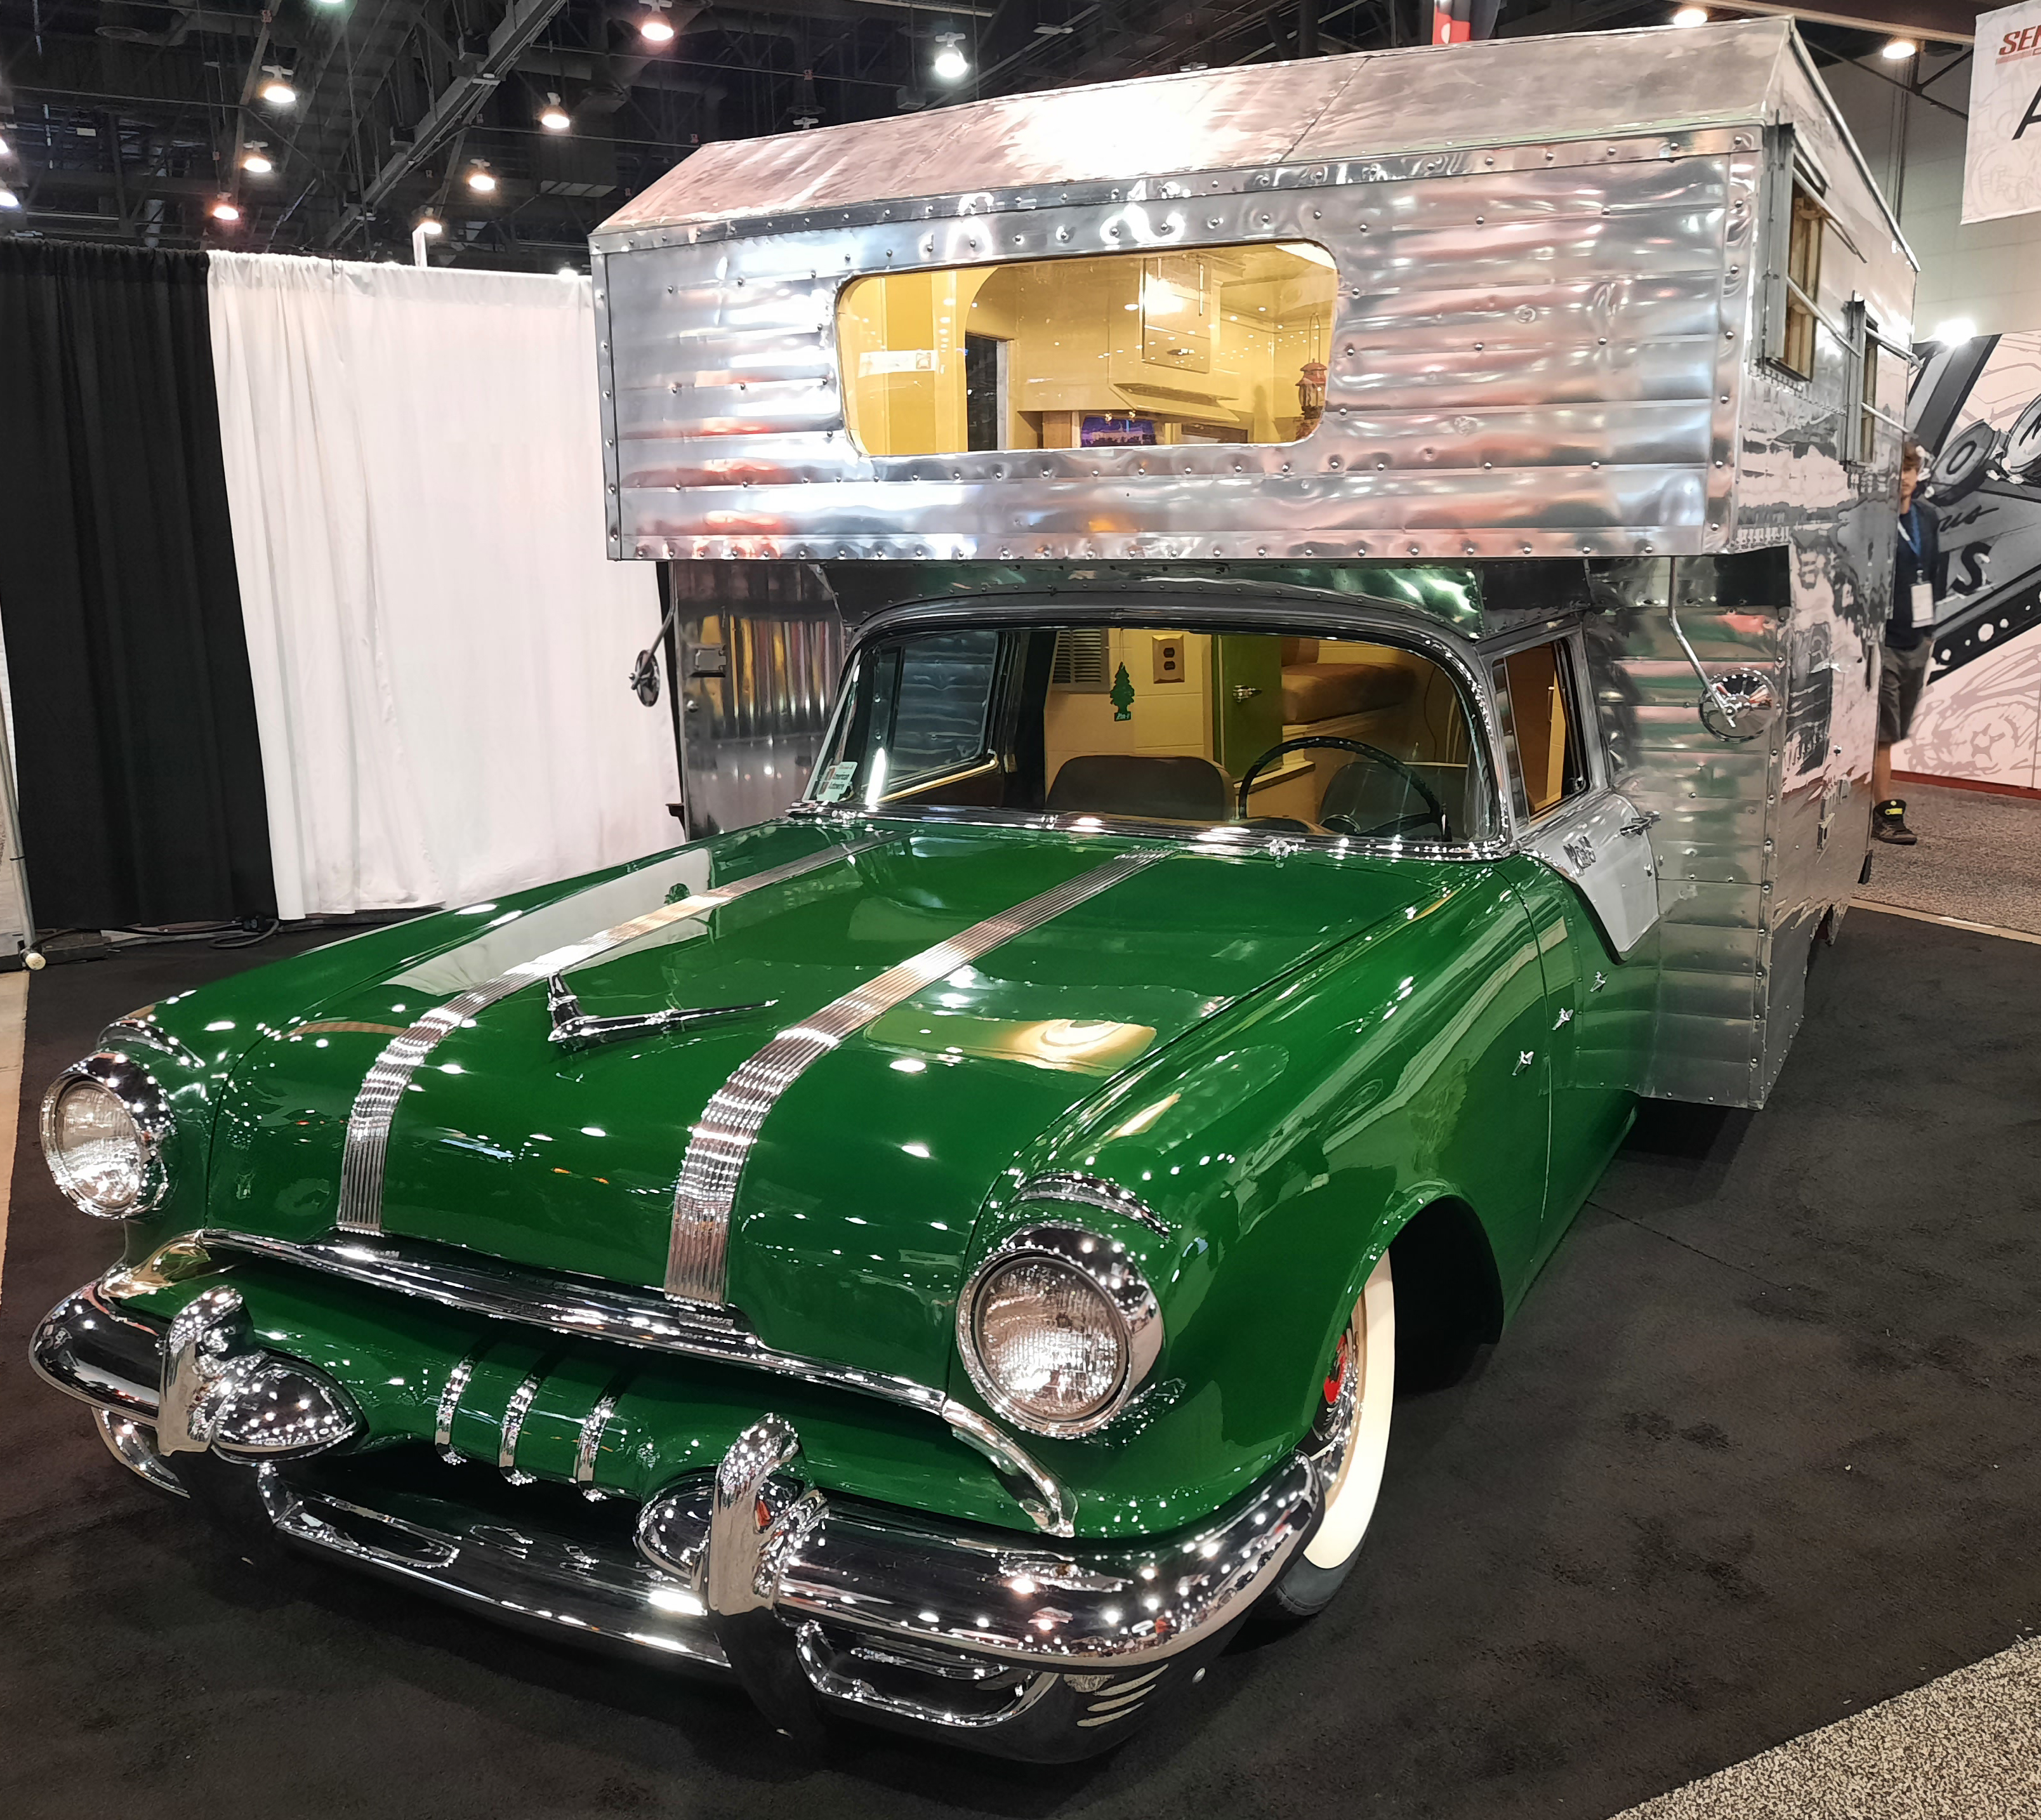 Just A Car Guy: Max Grundy brought a cool vehicle to SEMA this year, as he  always has. It's a 55 Pontiac, with an RV back half